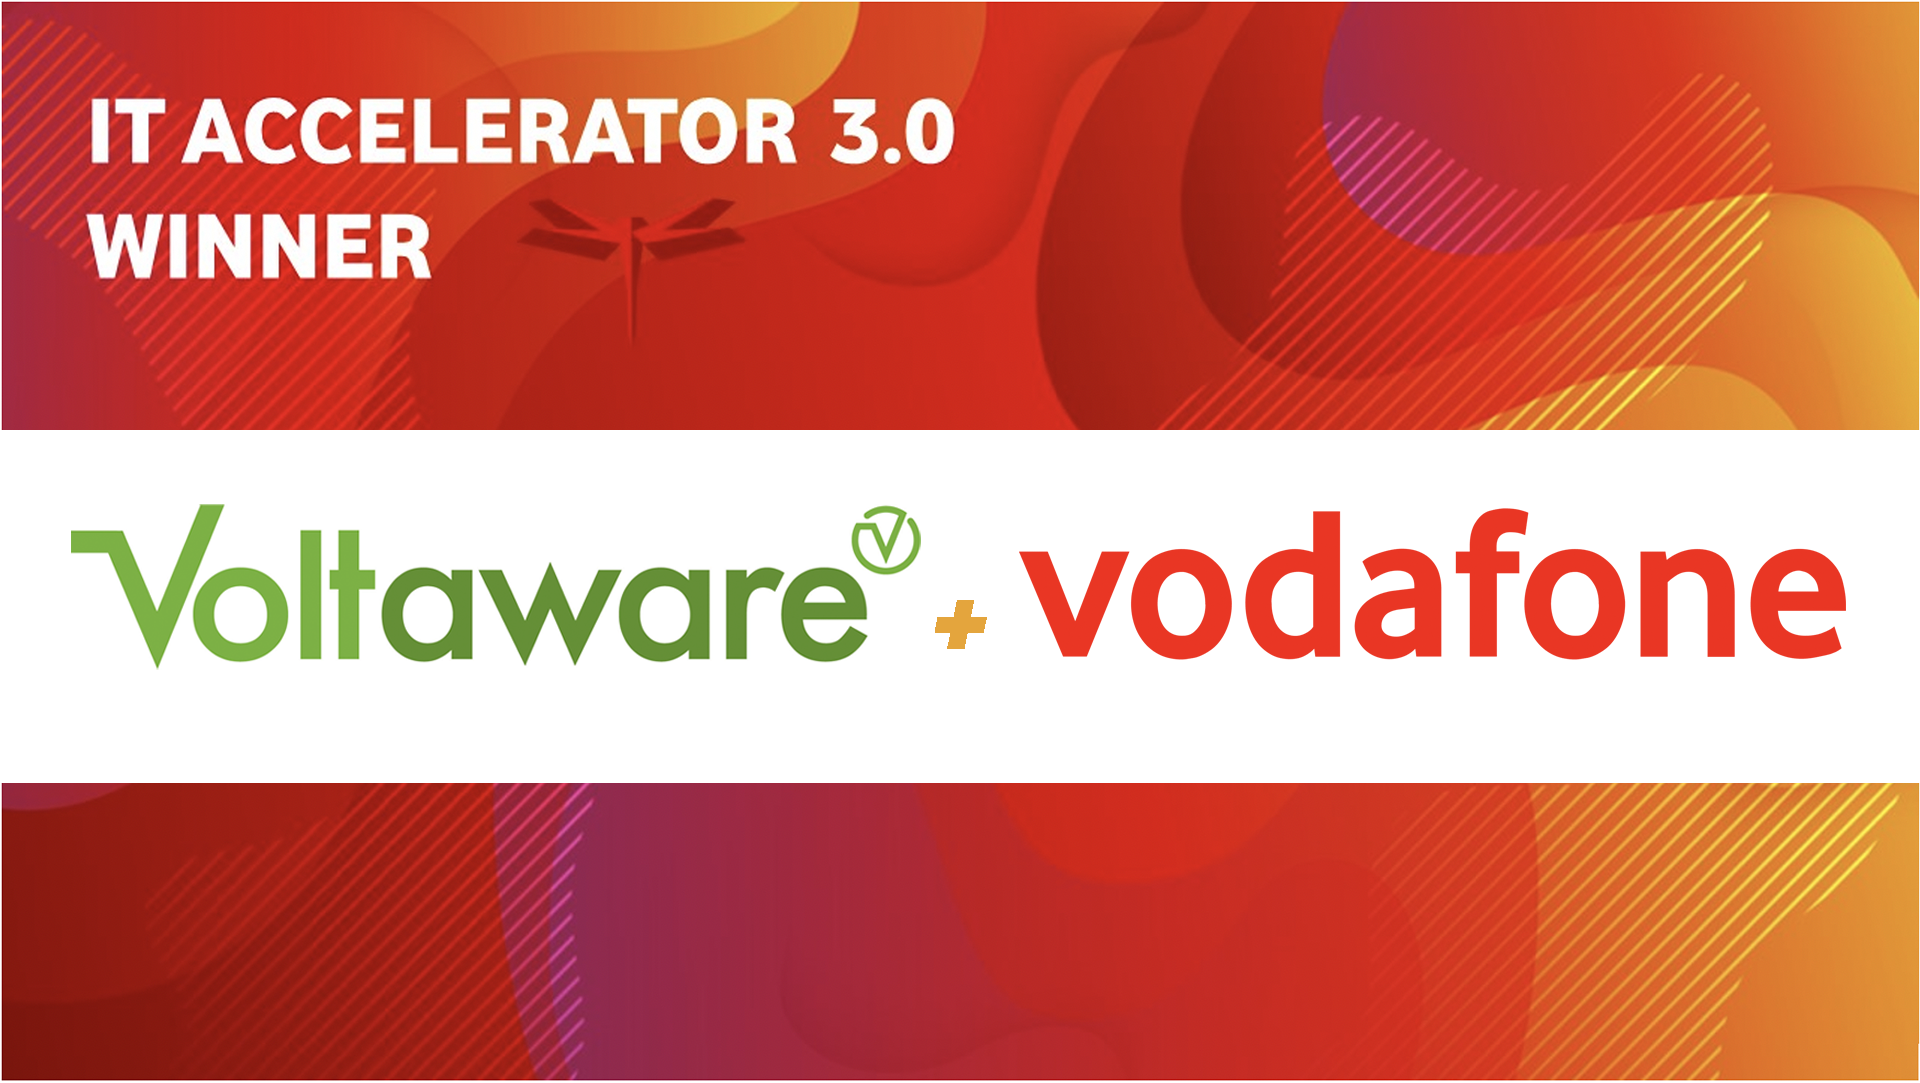 Voltaware wins ITA 3.0 challenge and partners with Vodafone